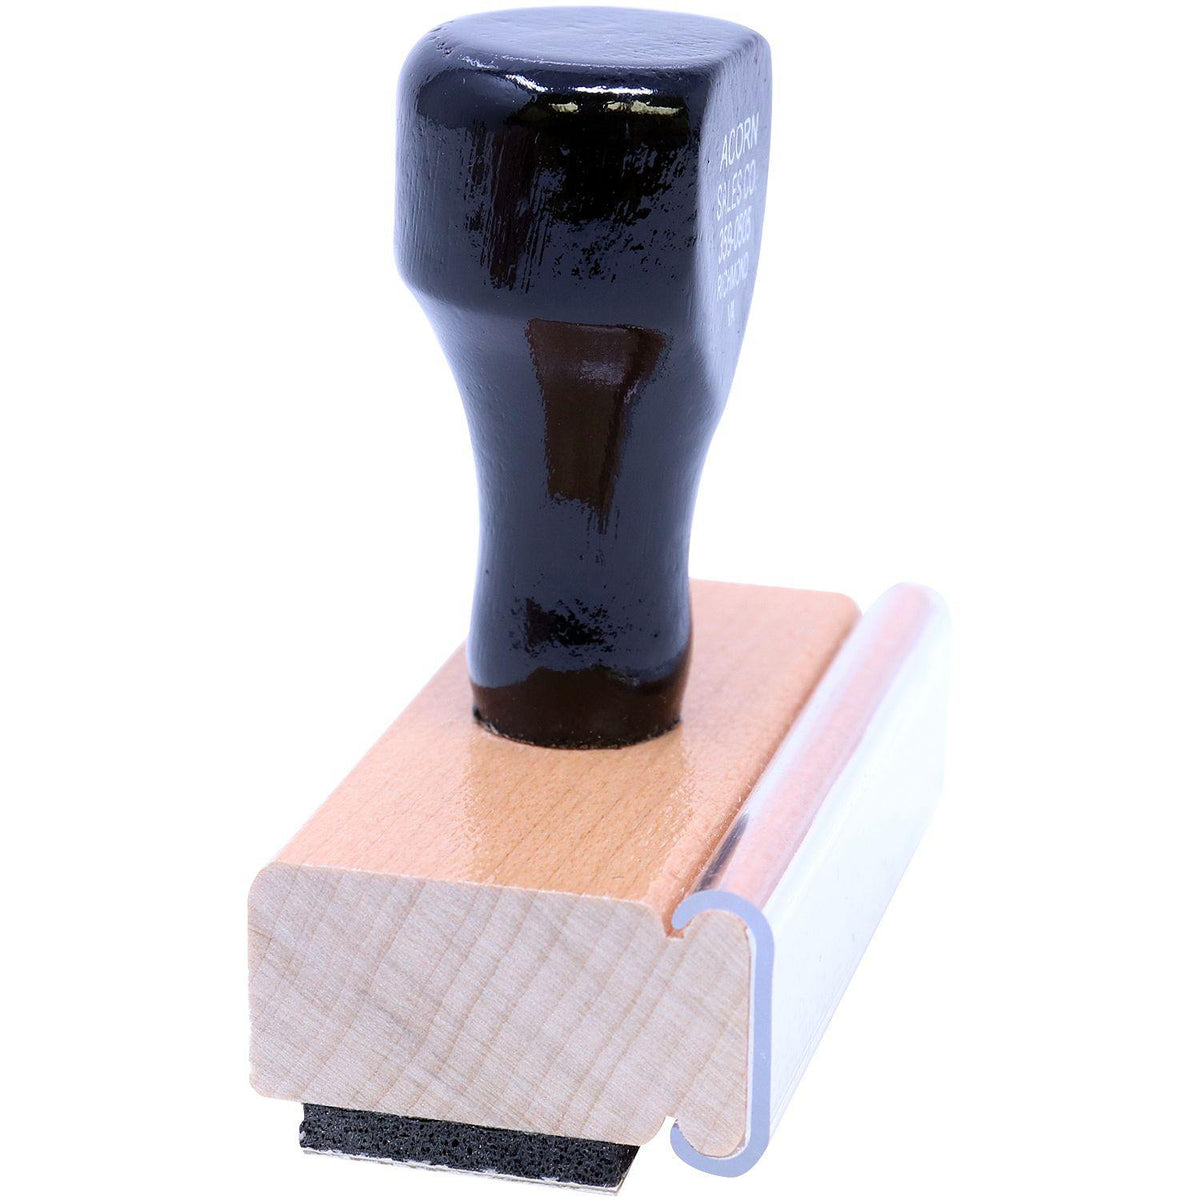 Side View of Large Media Mail Rubber Stamp at an Angle